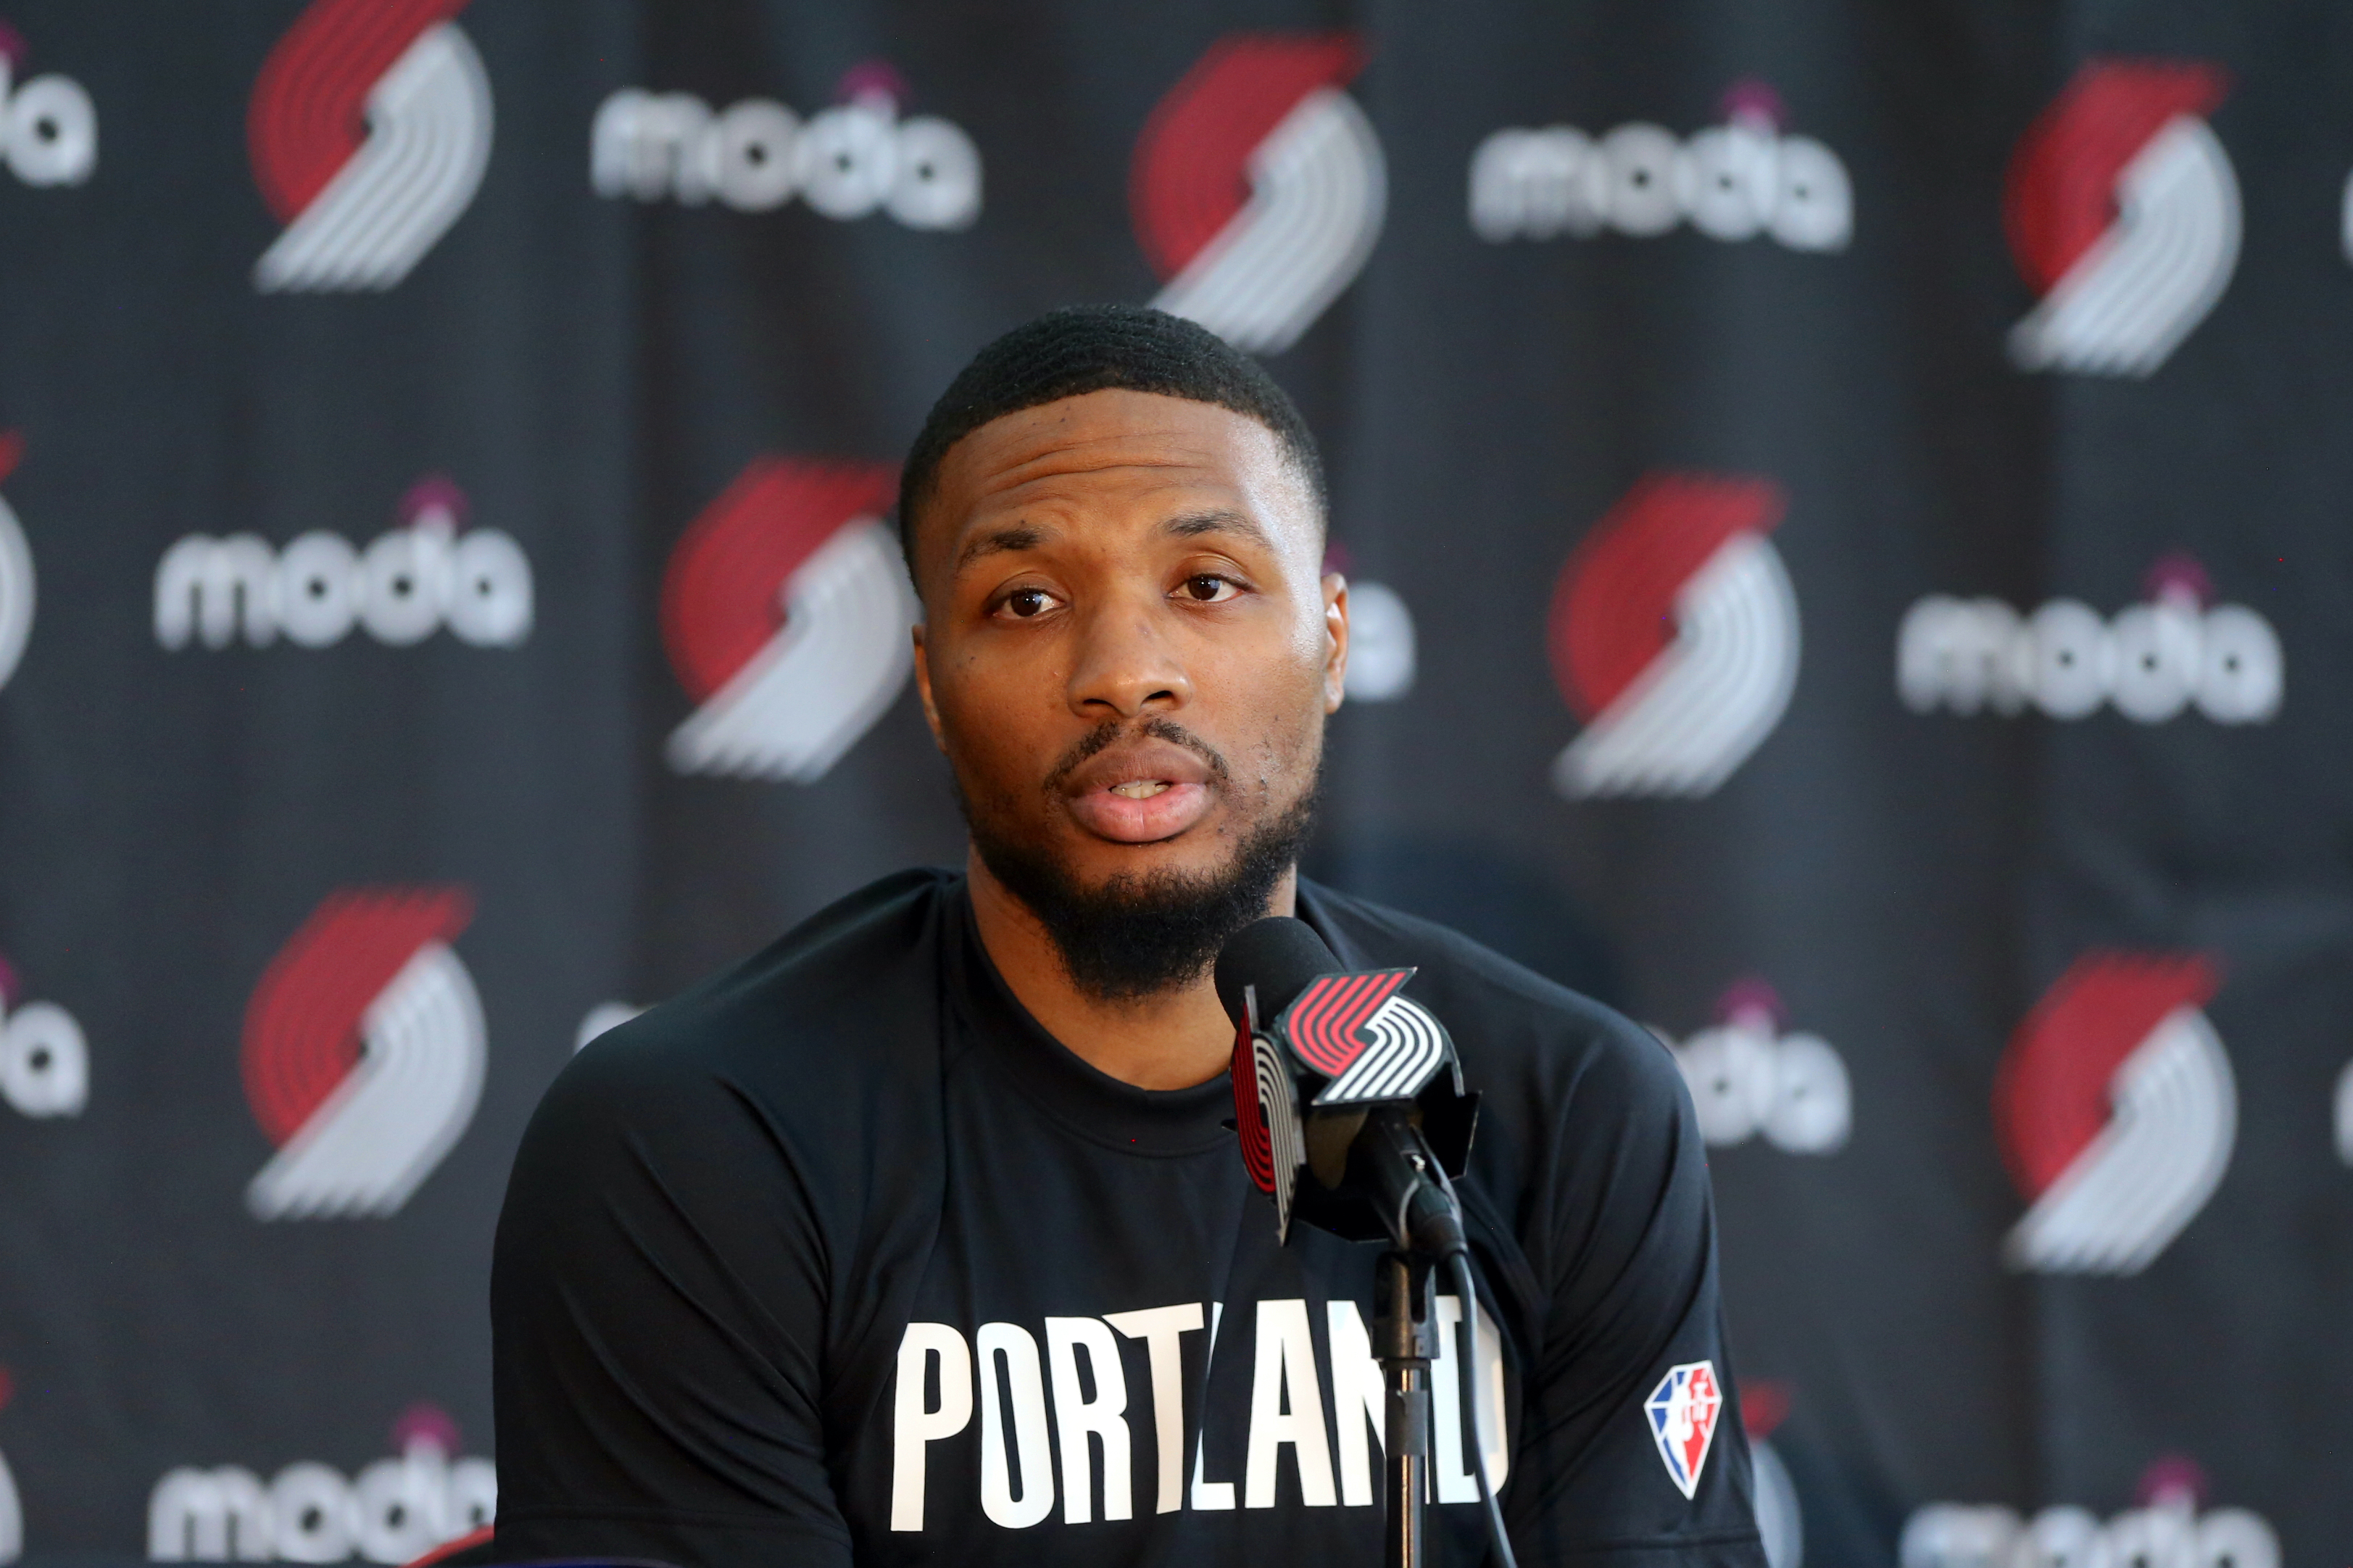 Damian Lillard on giving back to the community, who he goes to for  leadership advice, his process for creating an album, working with  sponsors, and how fatherhood has changed him.